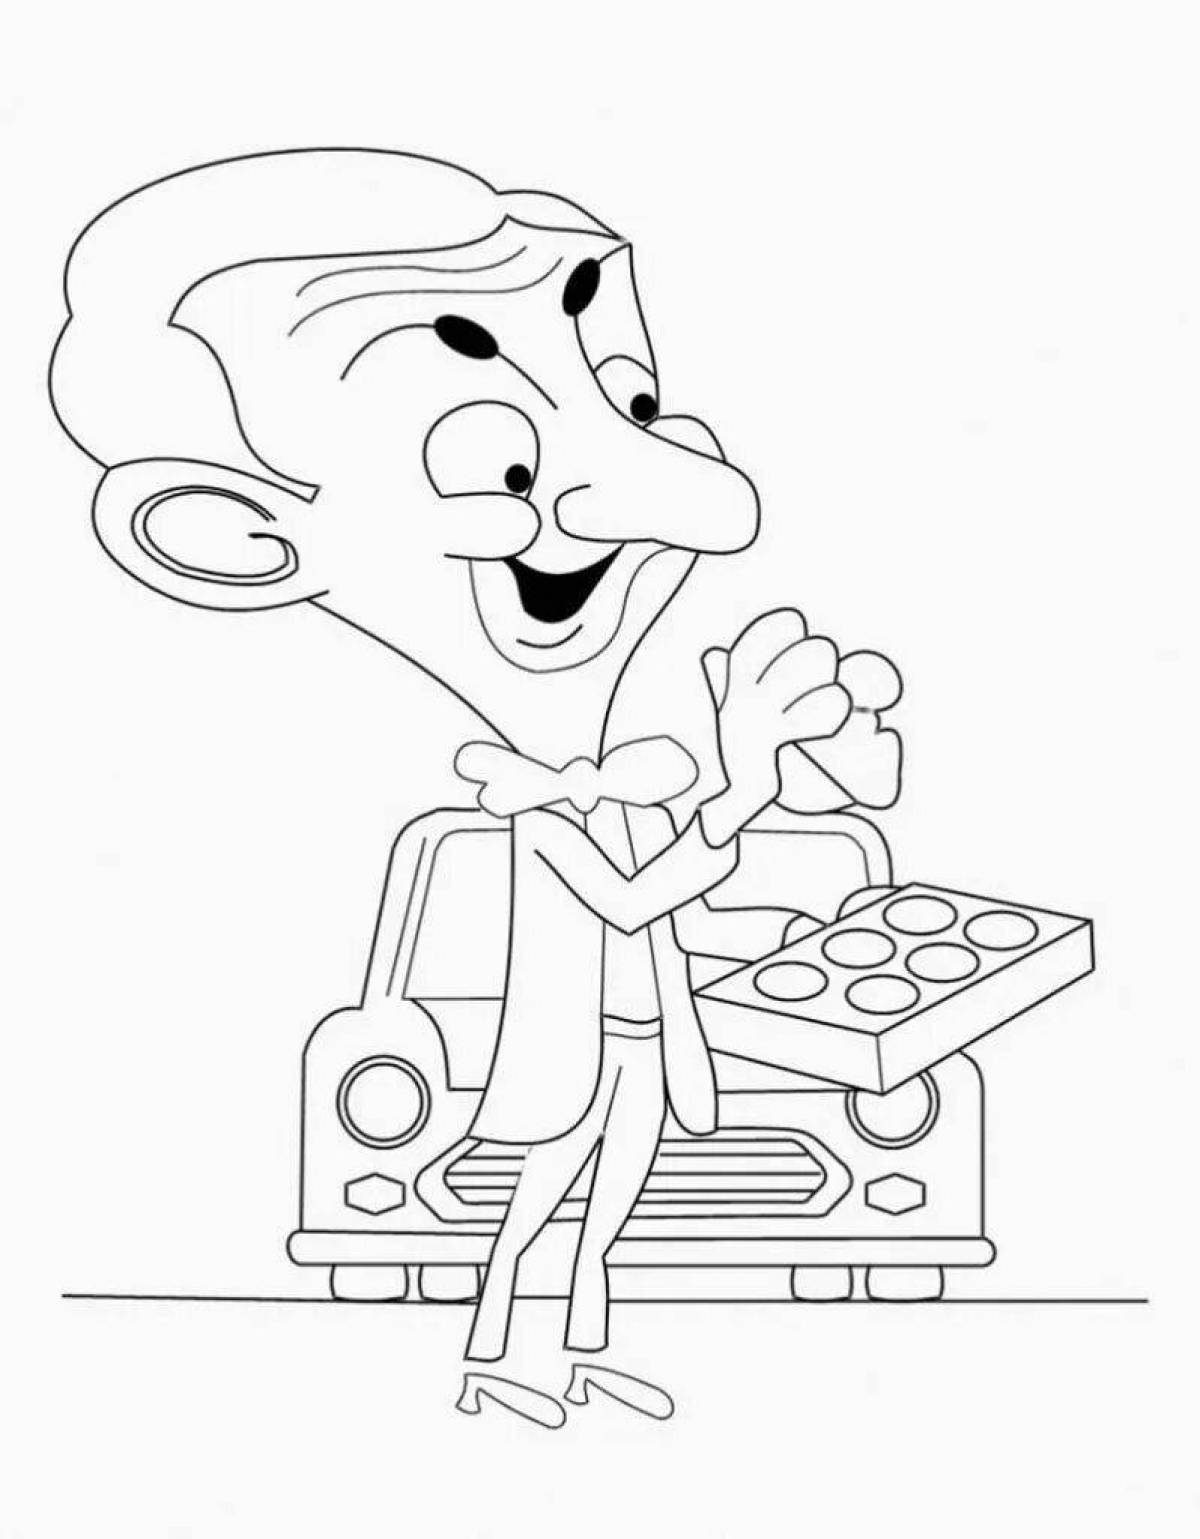 Coloring page funny mr bean